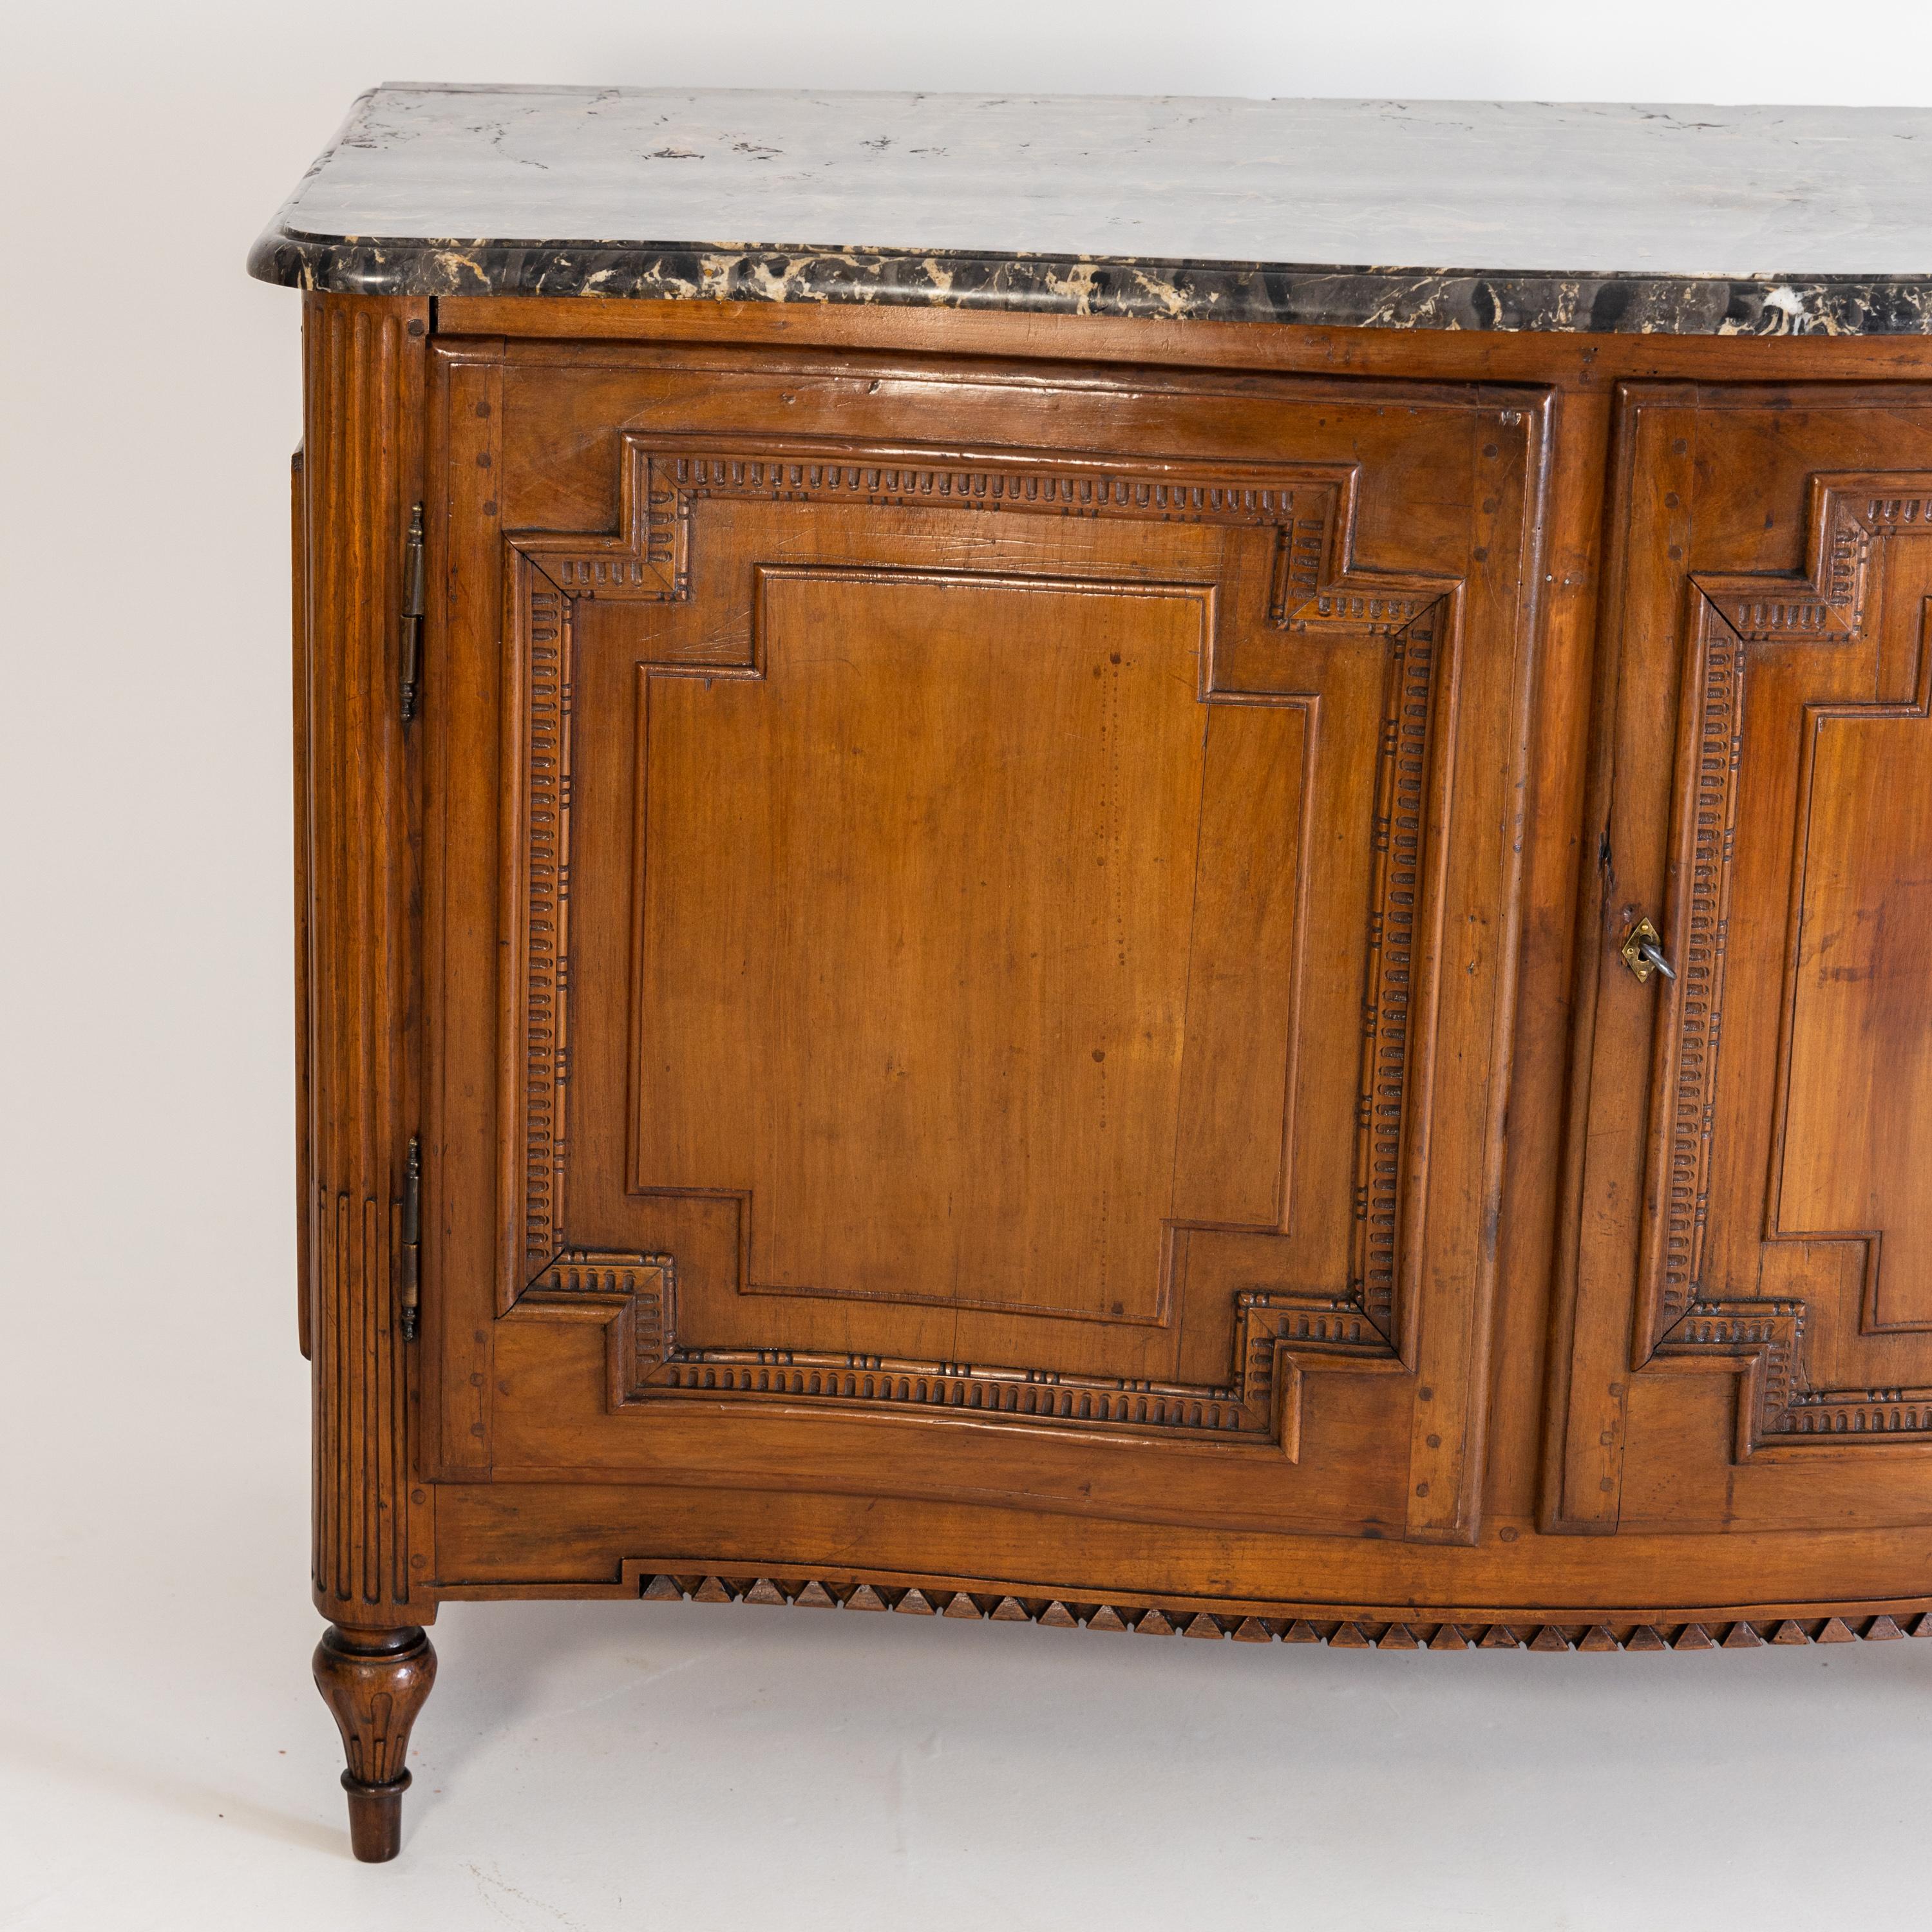 French Louis Seize Sideboard, End of 18th Century